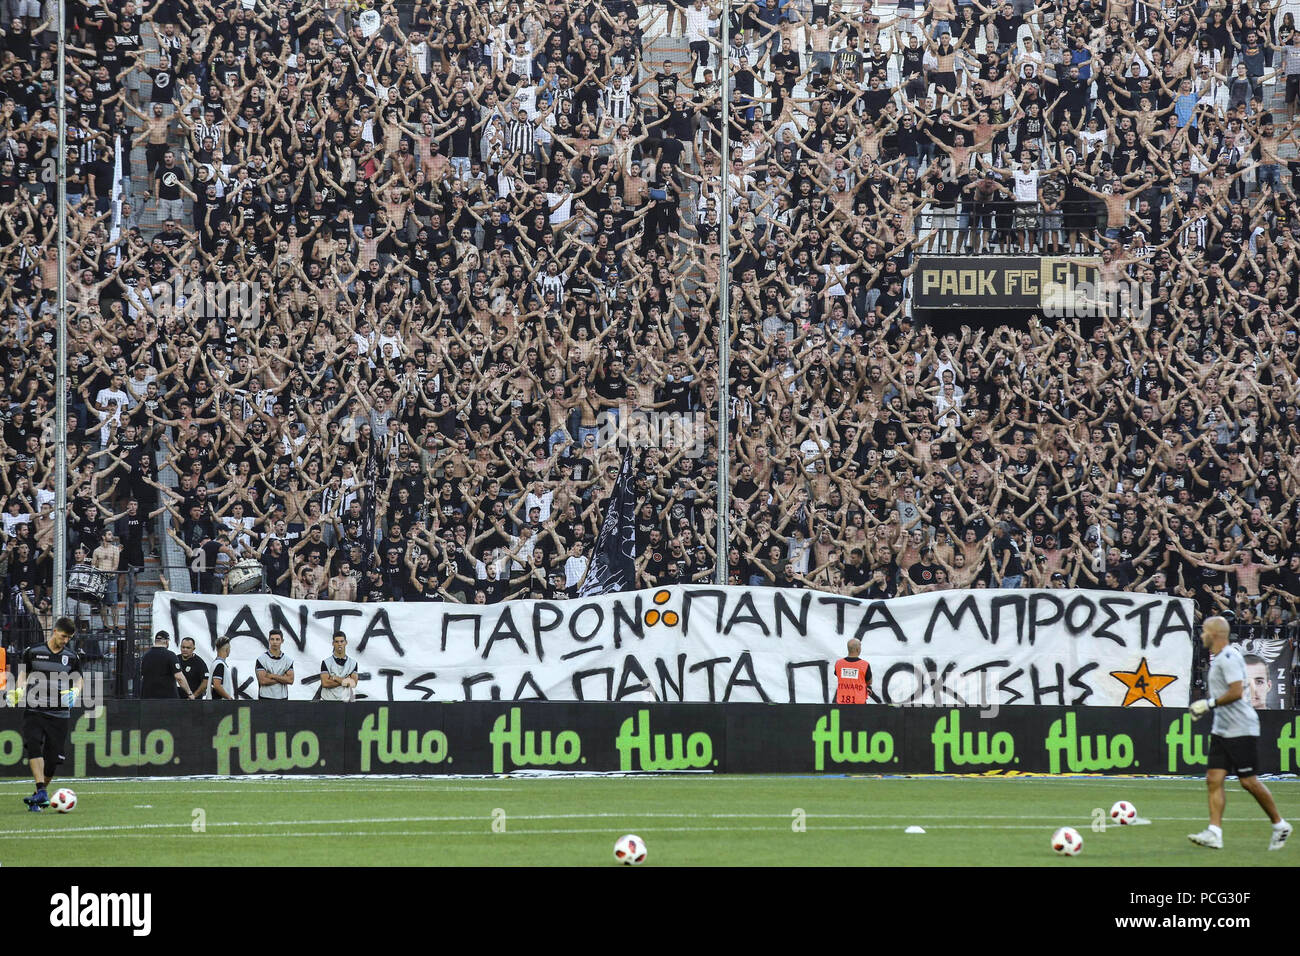 Paok fans stock photography and - Alamy